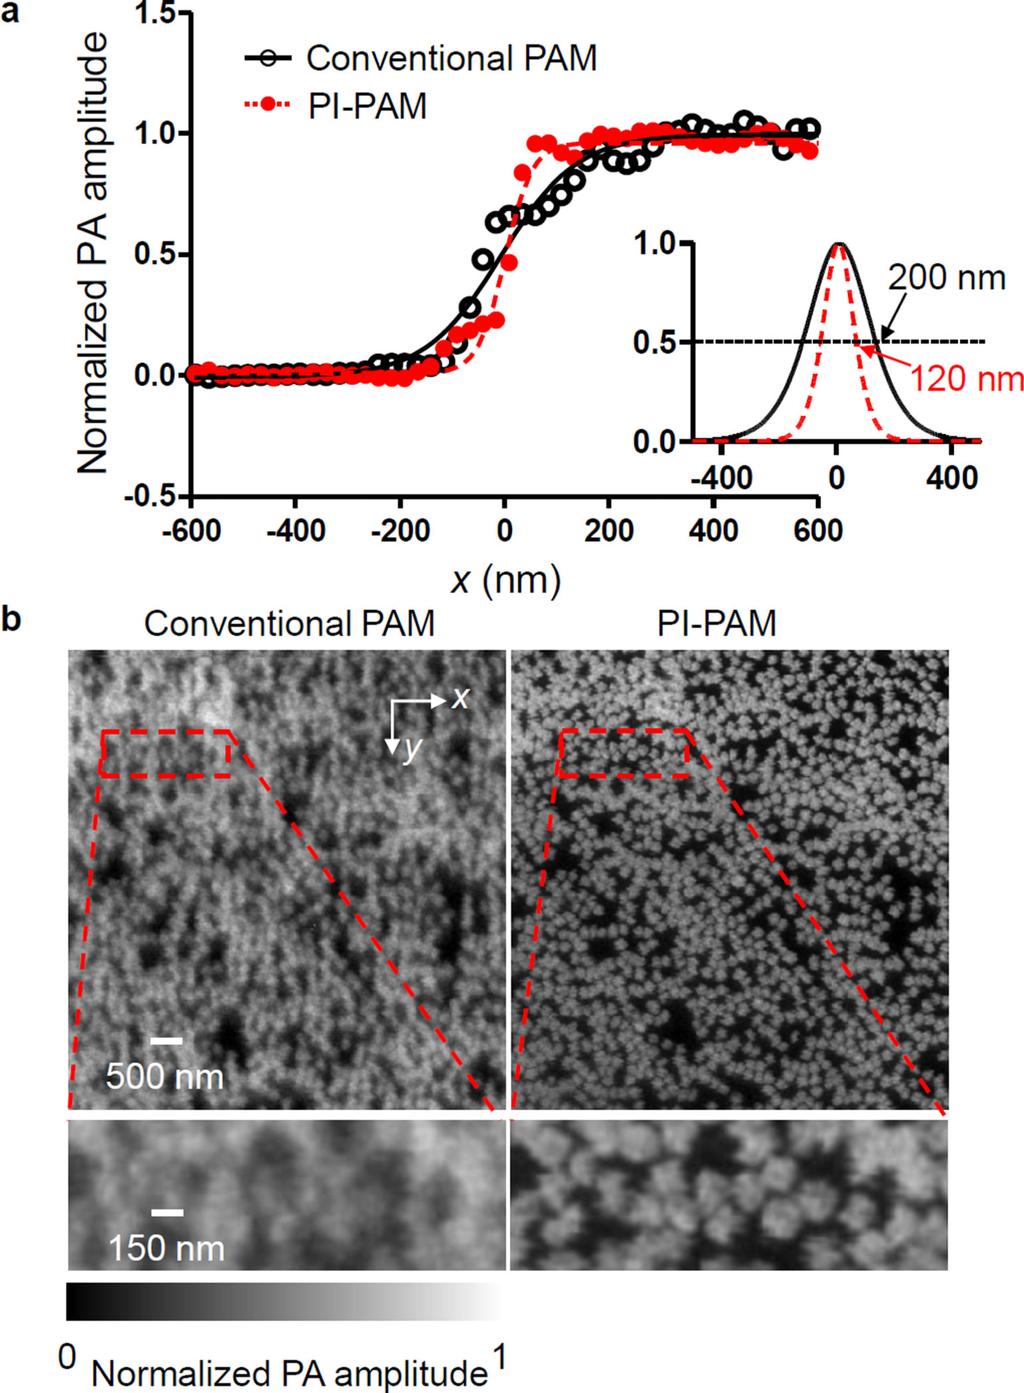 Yao et al. Page 9 Fig. 2. Lateral resolution enhancement by PI-PAM. (a) Edge spread function of conventional PAM and PI-PAM, using a sharp blade edge coated with hemoglobin.